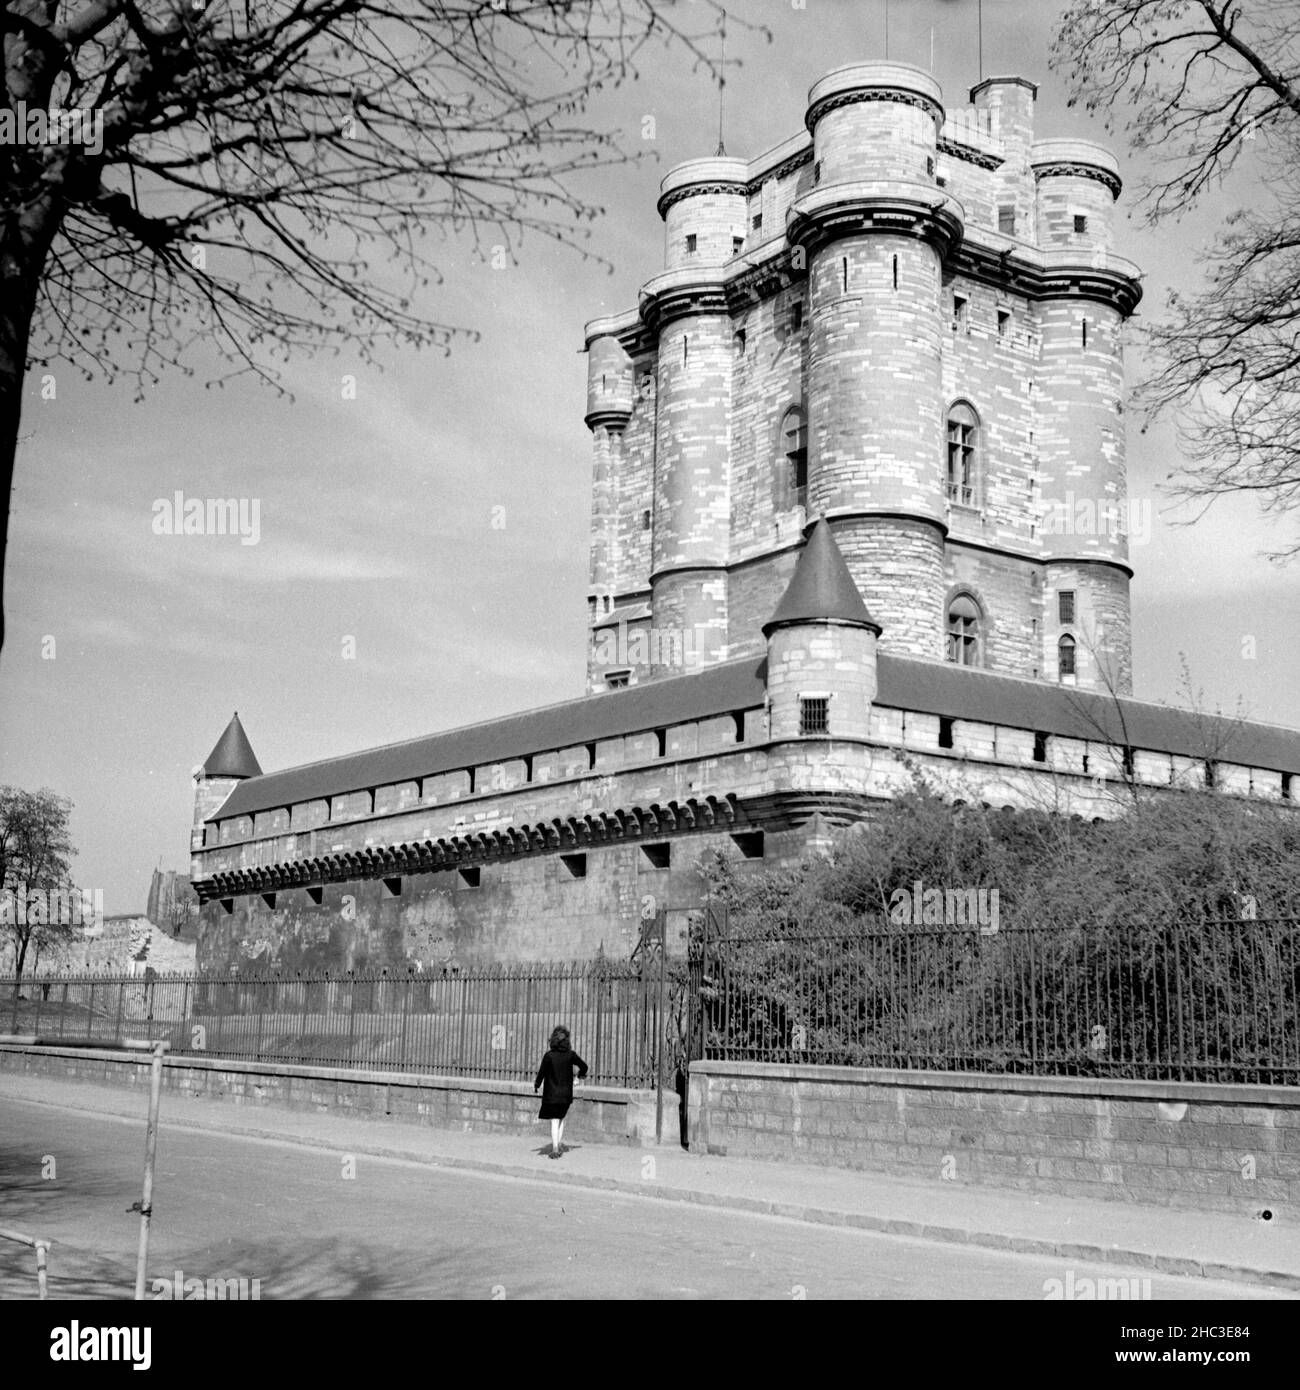 Paris Château de Vincennes, a woman walks outside the fortress walls, 1945. An early 1945 photograph taken from outside the west wall of the fortress shows a woman walking alone along the western perimeter. The Keep or Donjon rise dramatically above the wall. Ahead of her direction of travel, the edge of the image indicates a break in the fortress wall. Seven months before this photograph was taken, retreating German occupation forces exploded munitions that they stored inside. Stock Photo